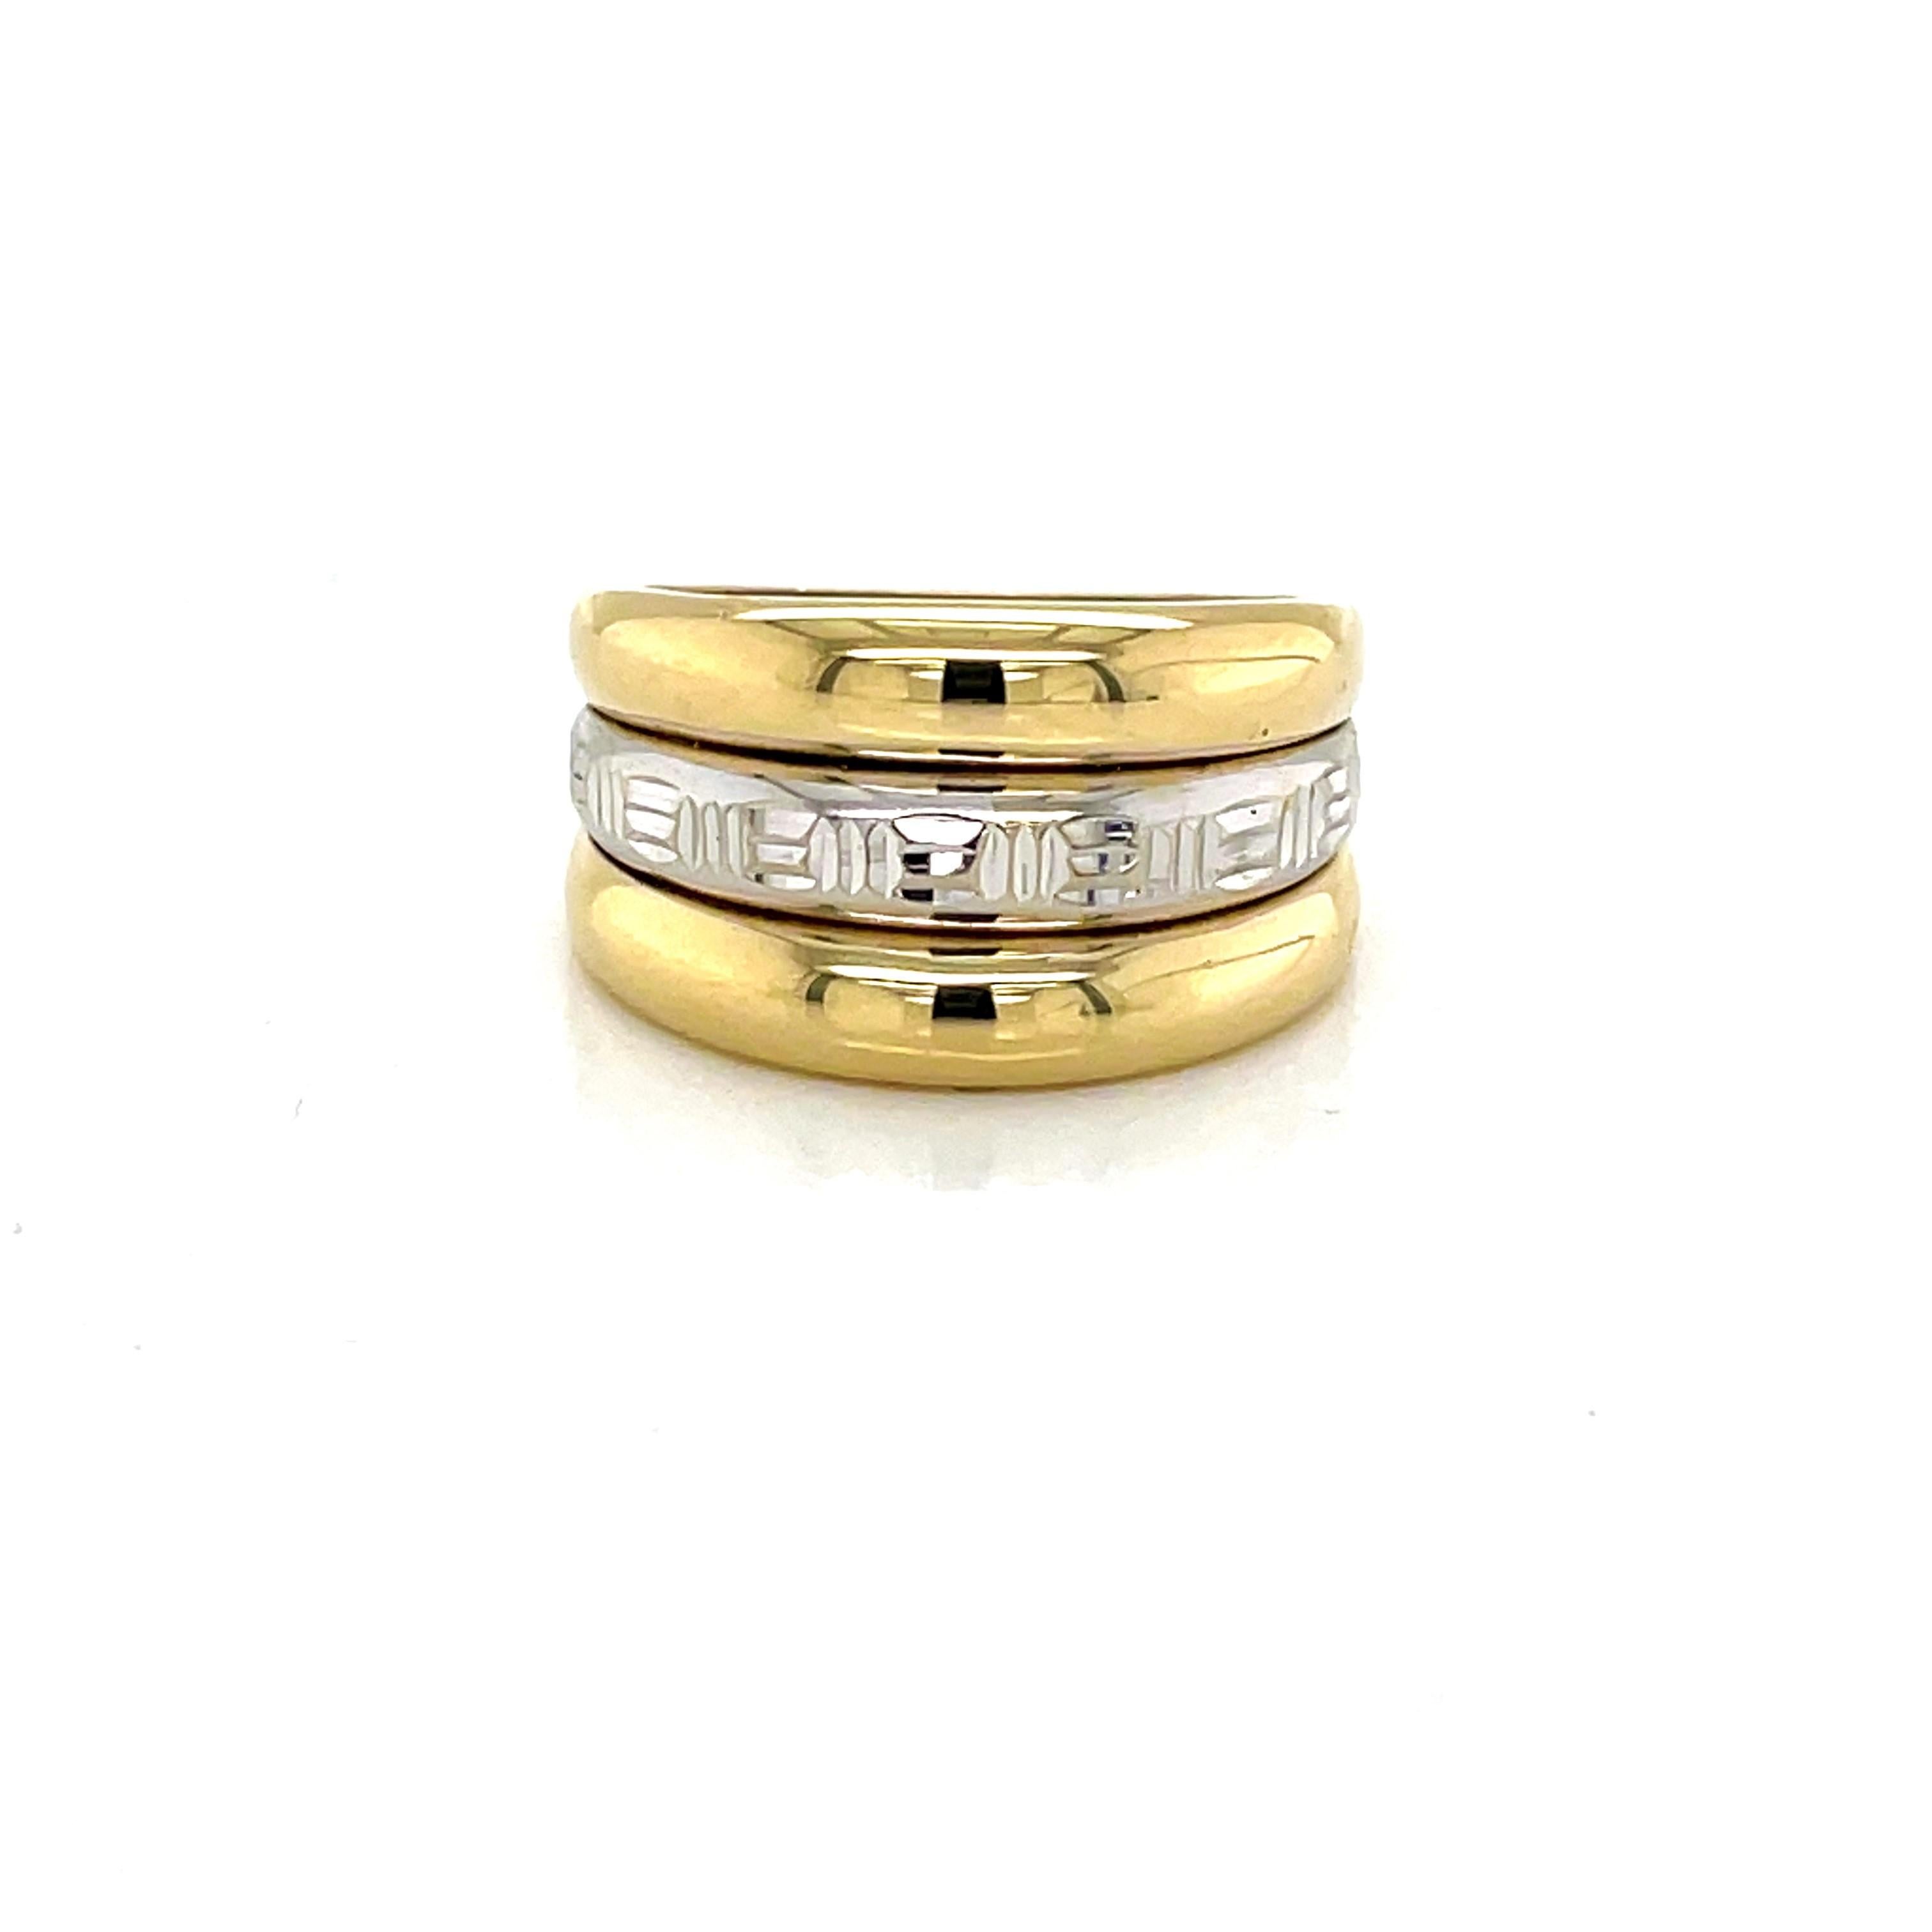 With both fourteen karat 14K white gold and fourteen karat 14K yellow gold, this versatile band offers contemporary style and comfort for everyday wear. Measuring 11.8mm in width at its face and gently tapering back to 5.5mm, the ring's white gold